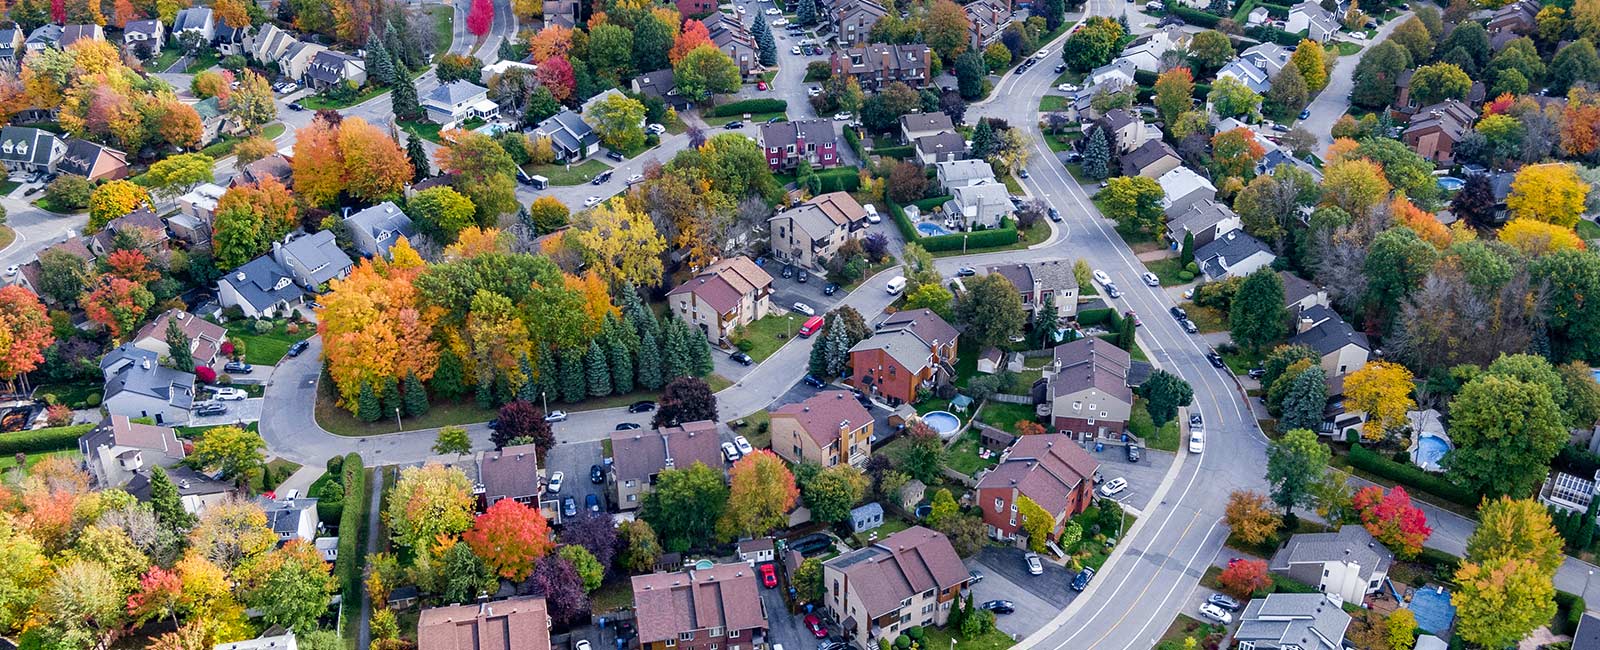 An aerial photograph of a neighborhood from a drone